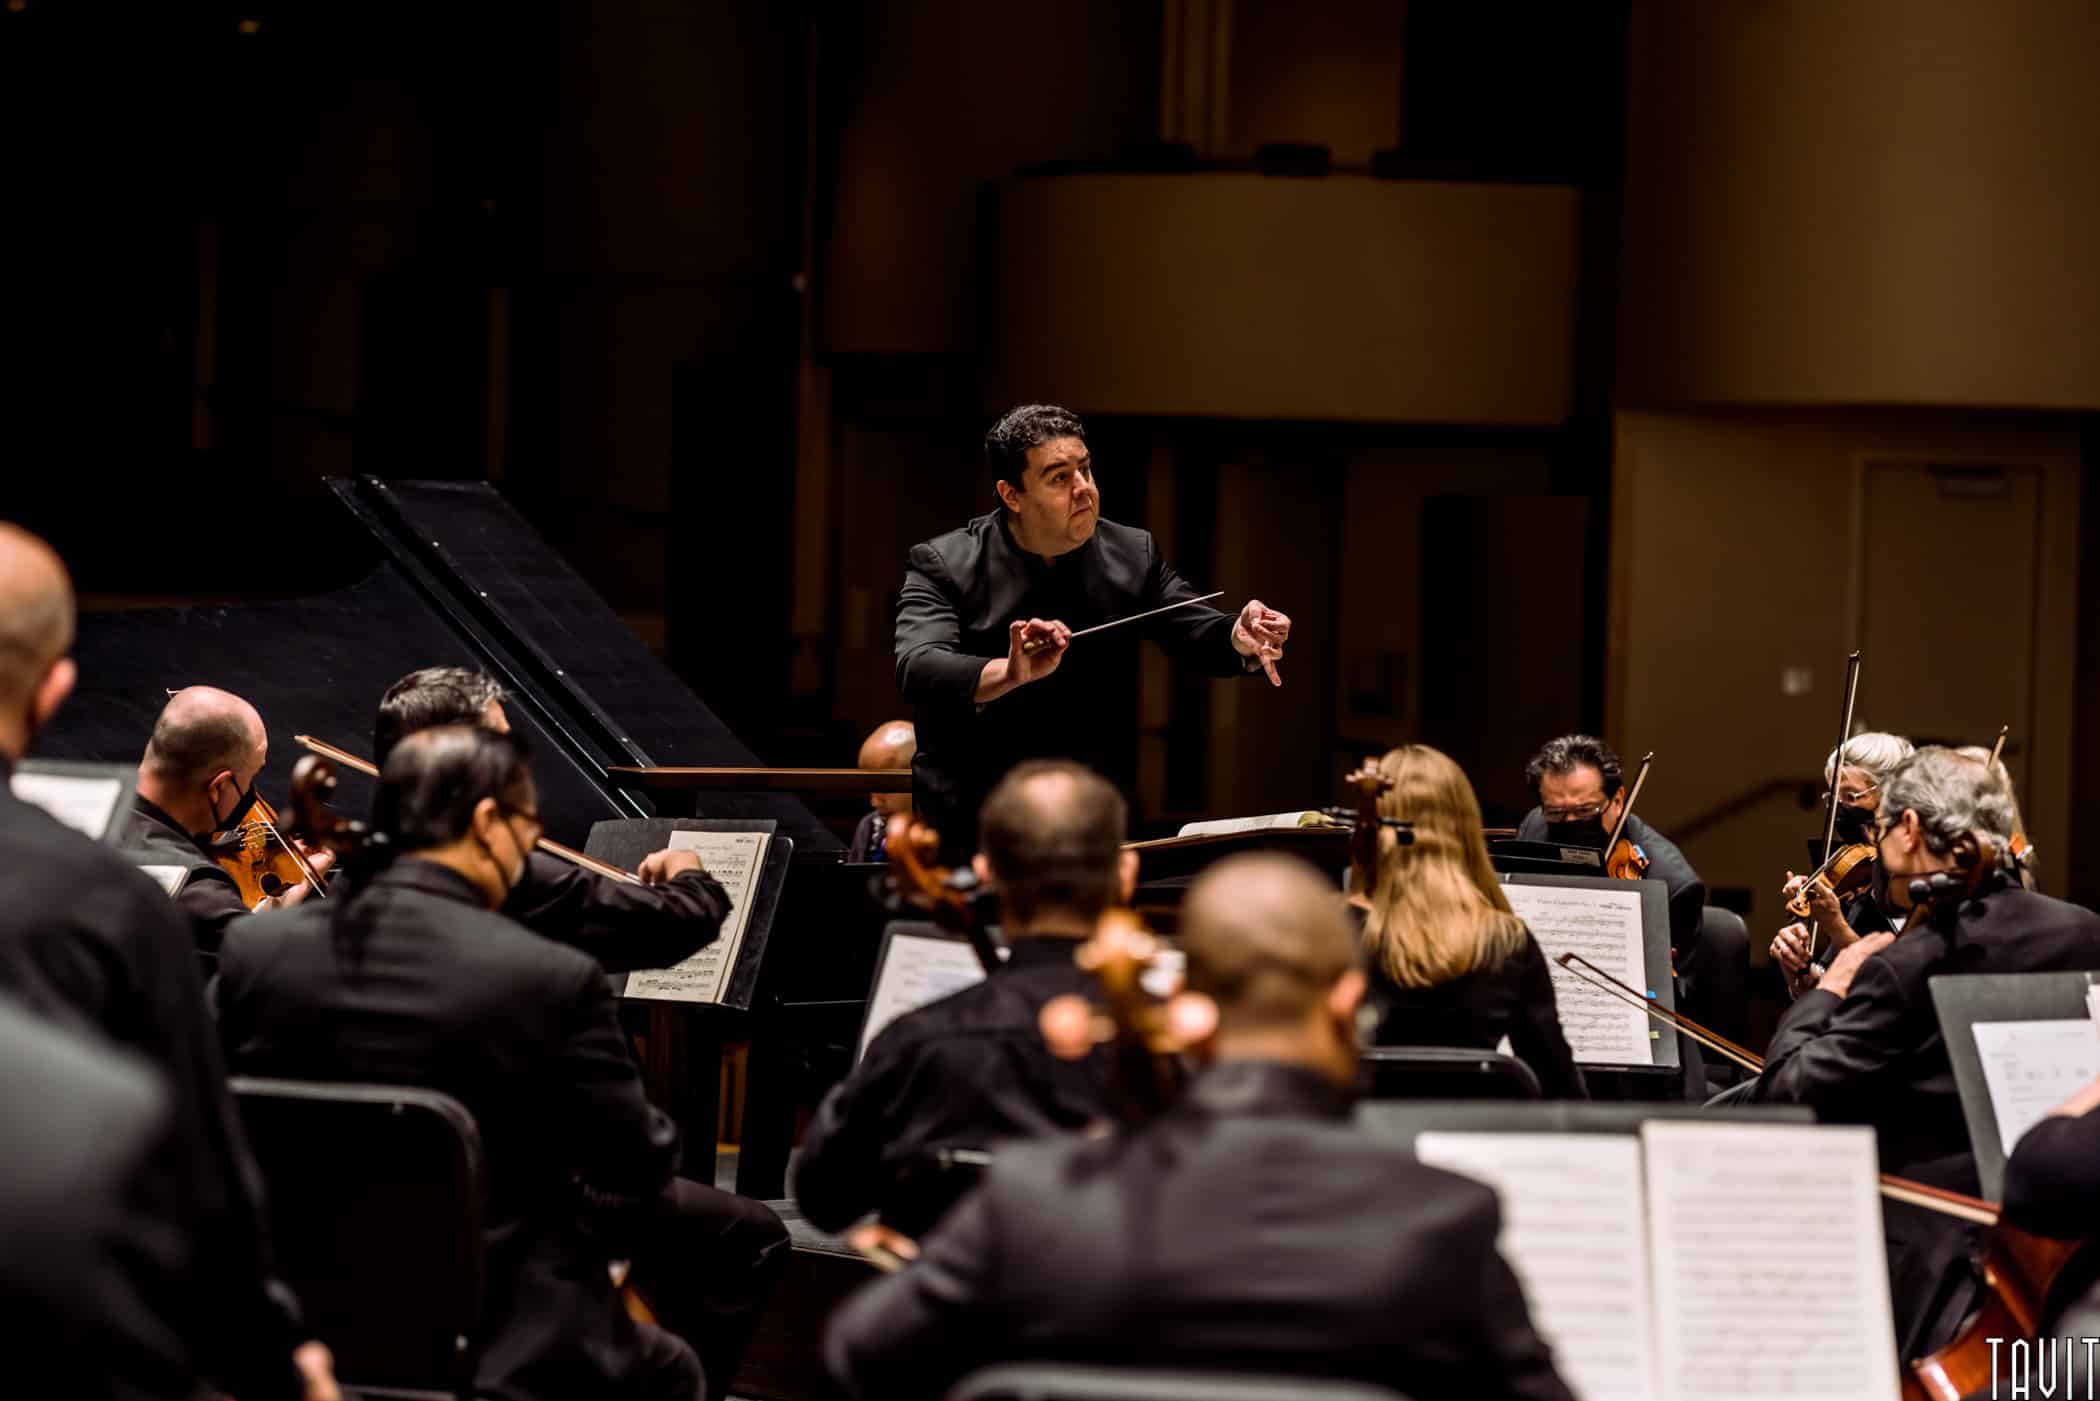 Conductor cueing in part of orchestra